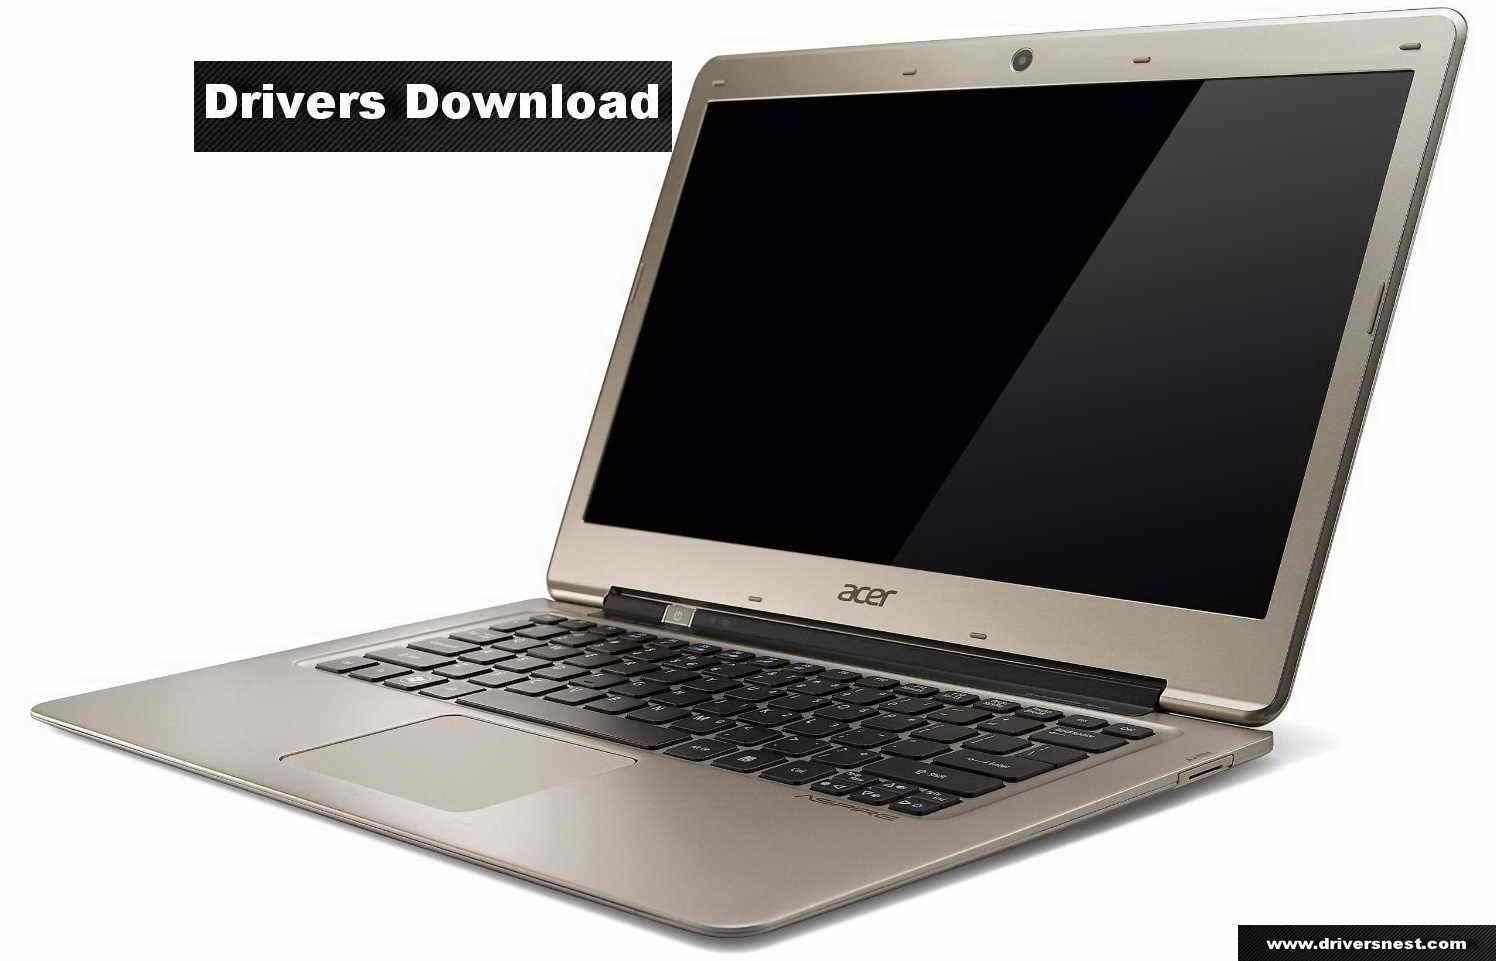 Acer aspire drivers